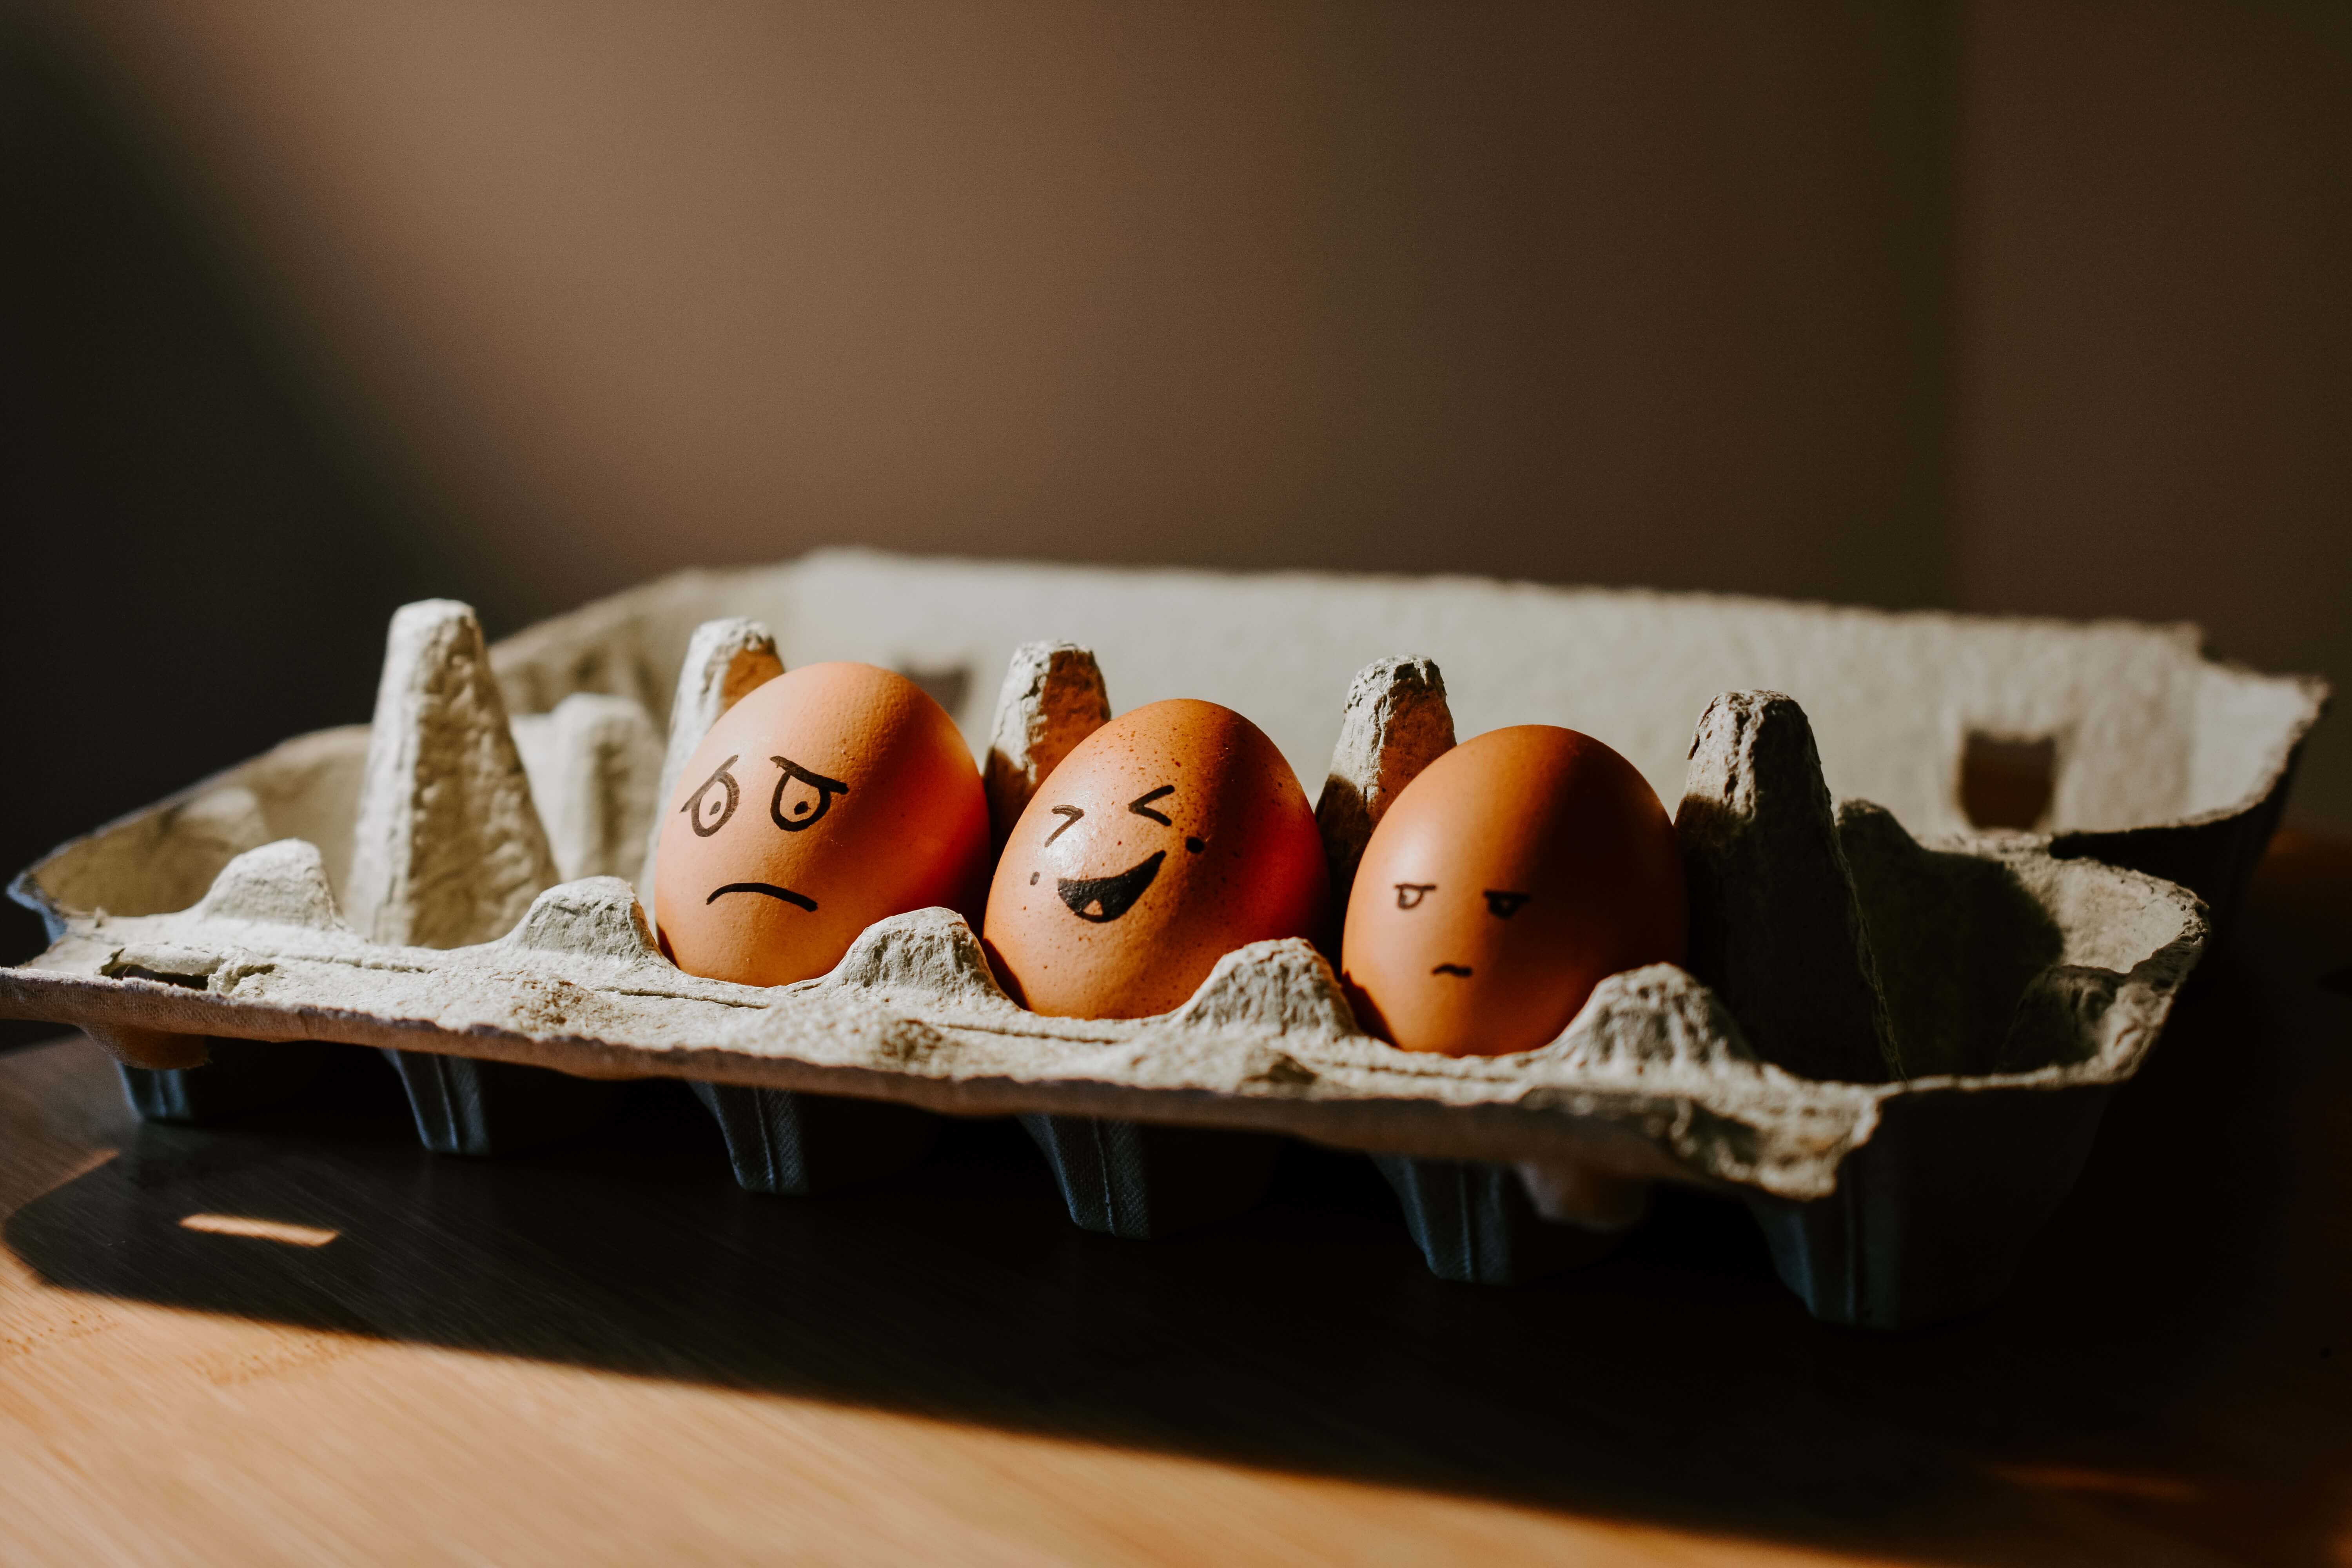 Eggs with drawn faces